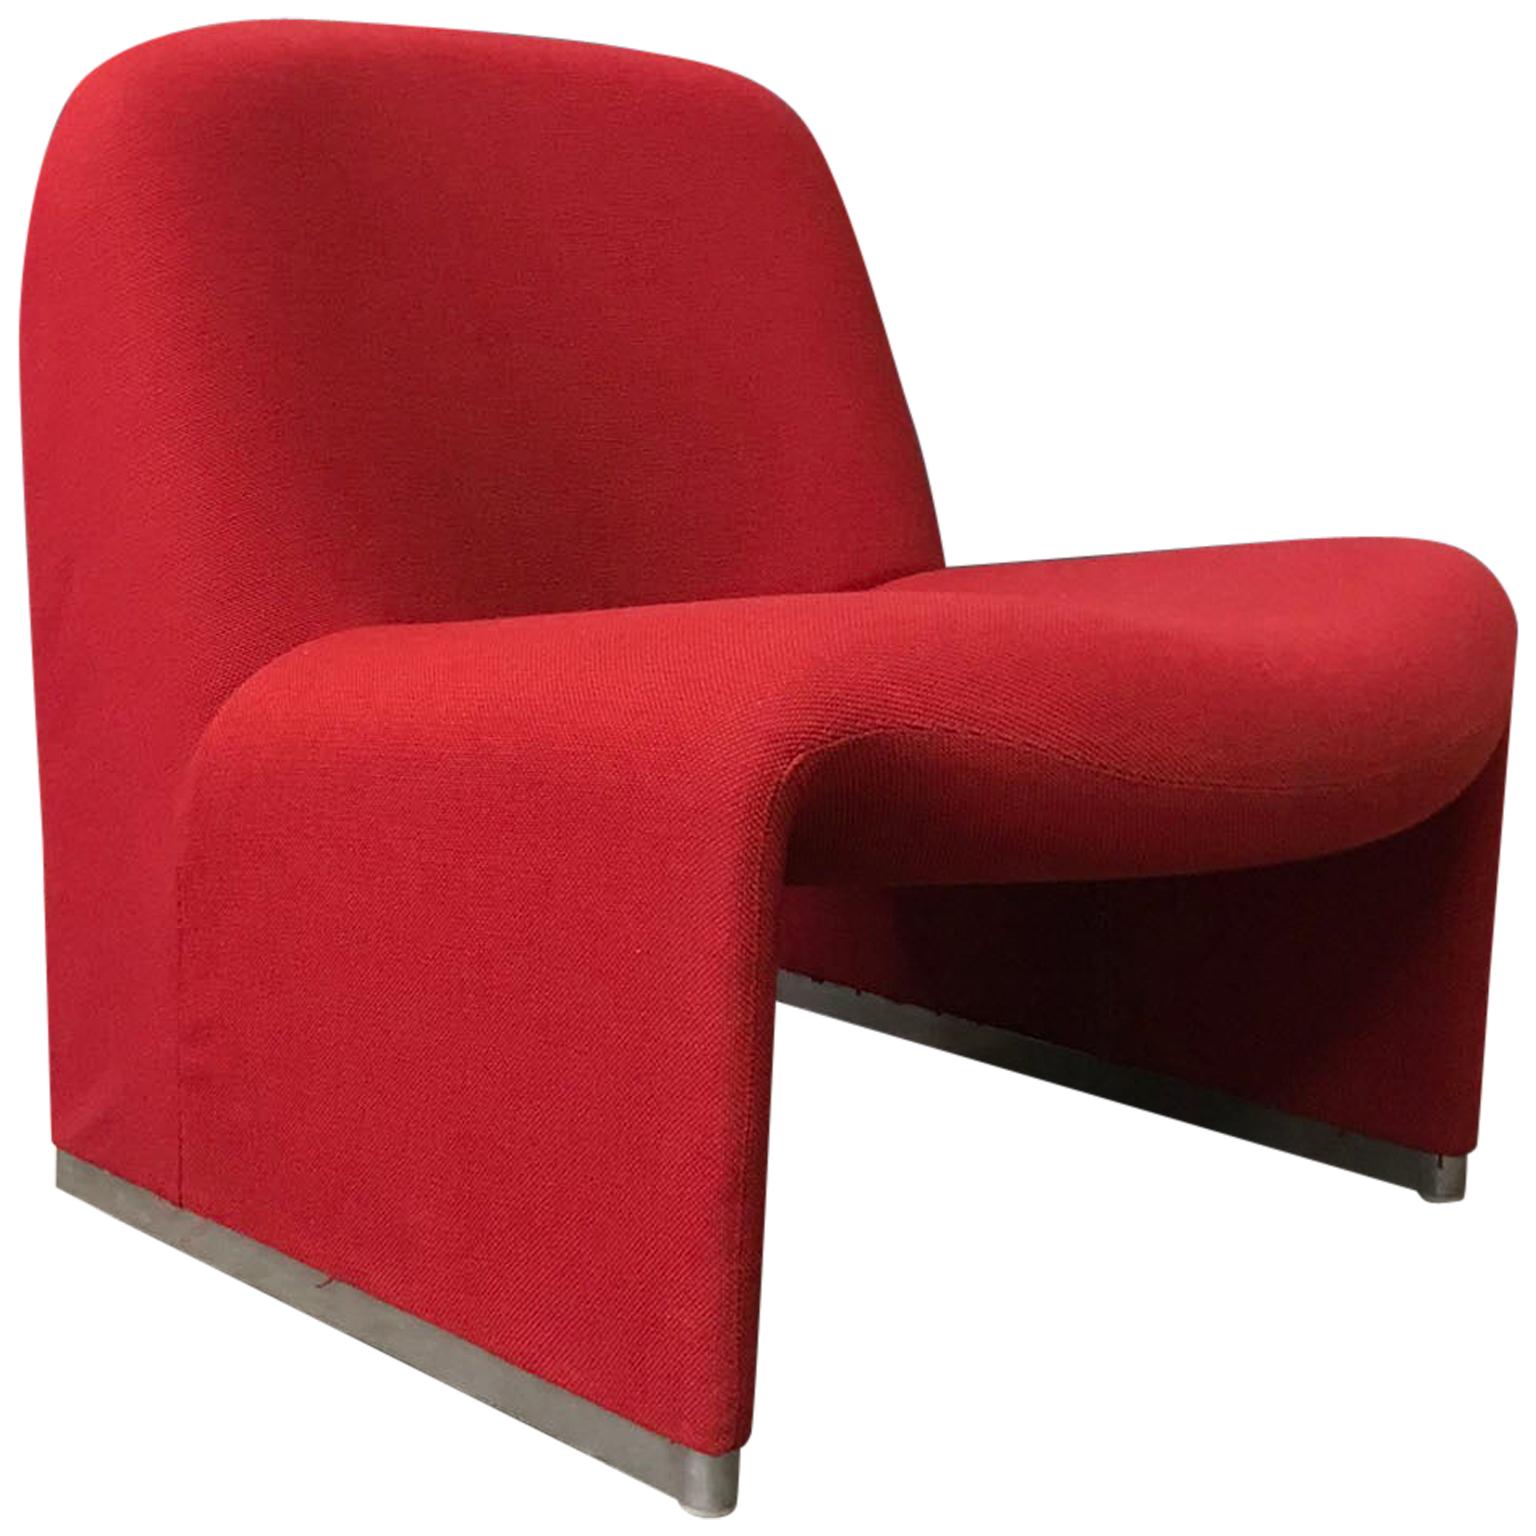 1970, Giancarlo Piretti for Castelli, Italy, Red Fabric Alky Chair